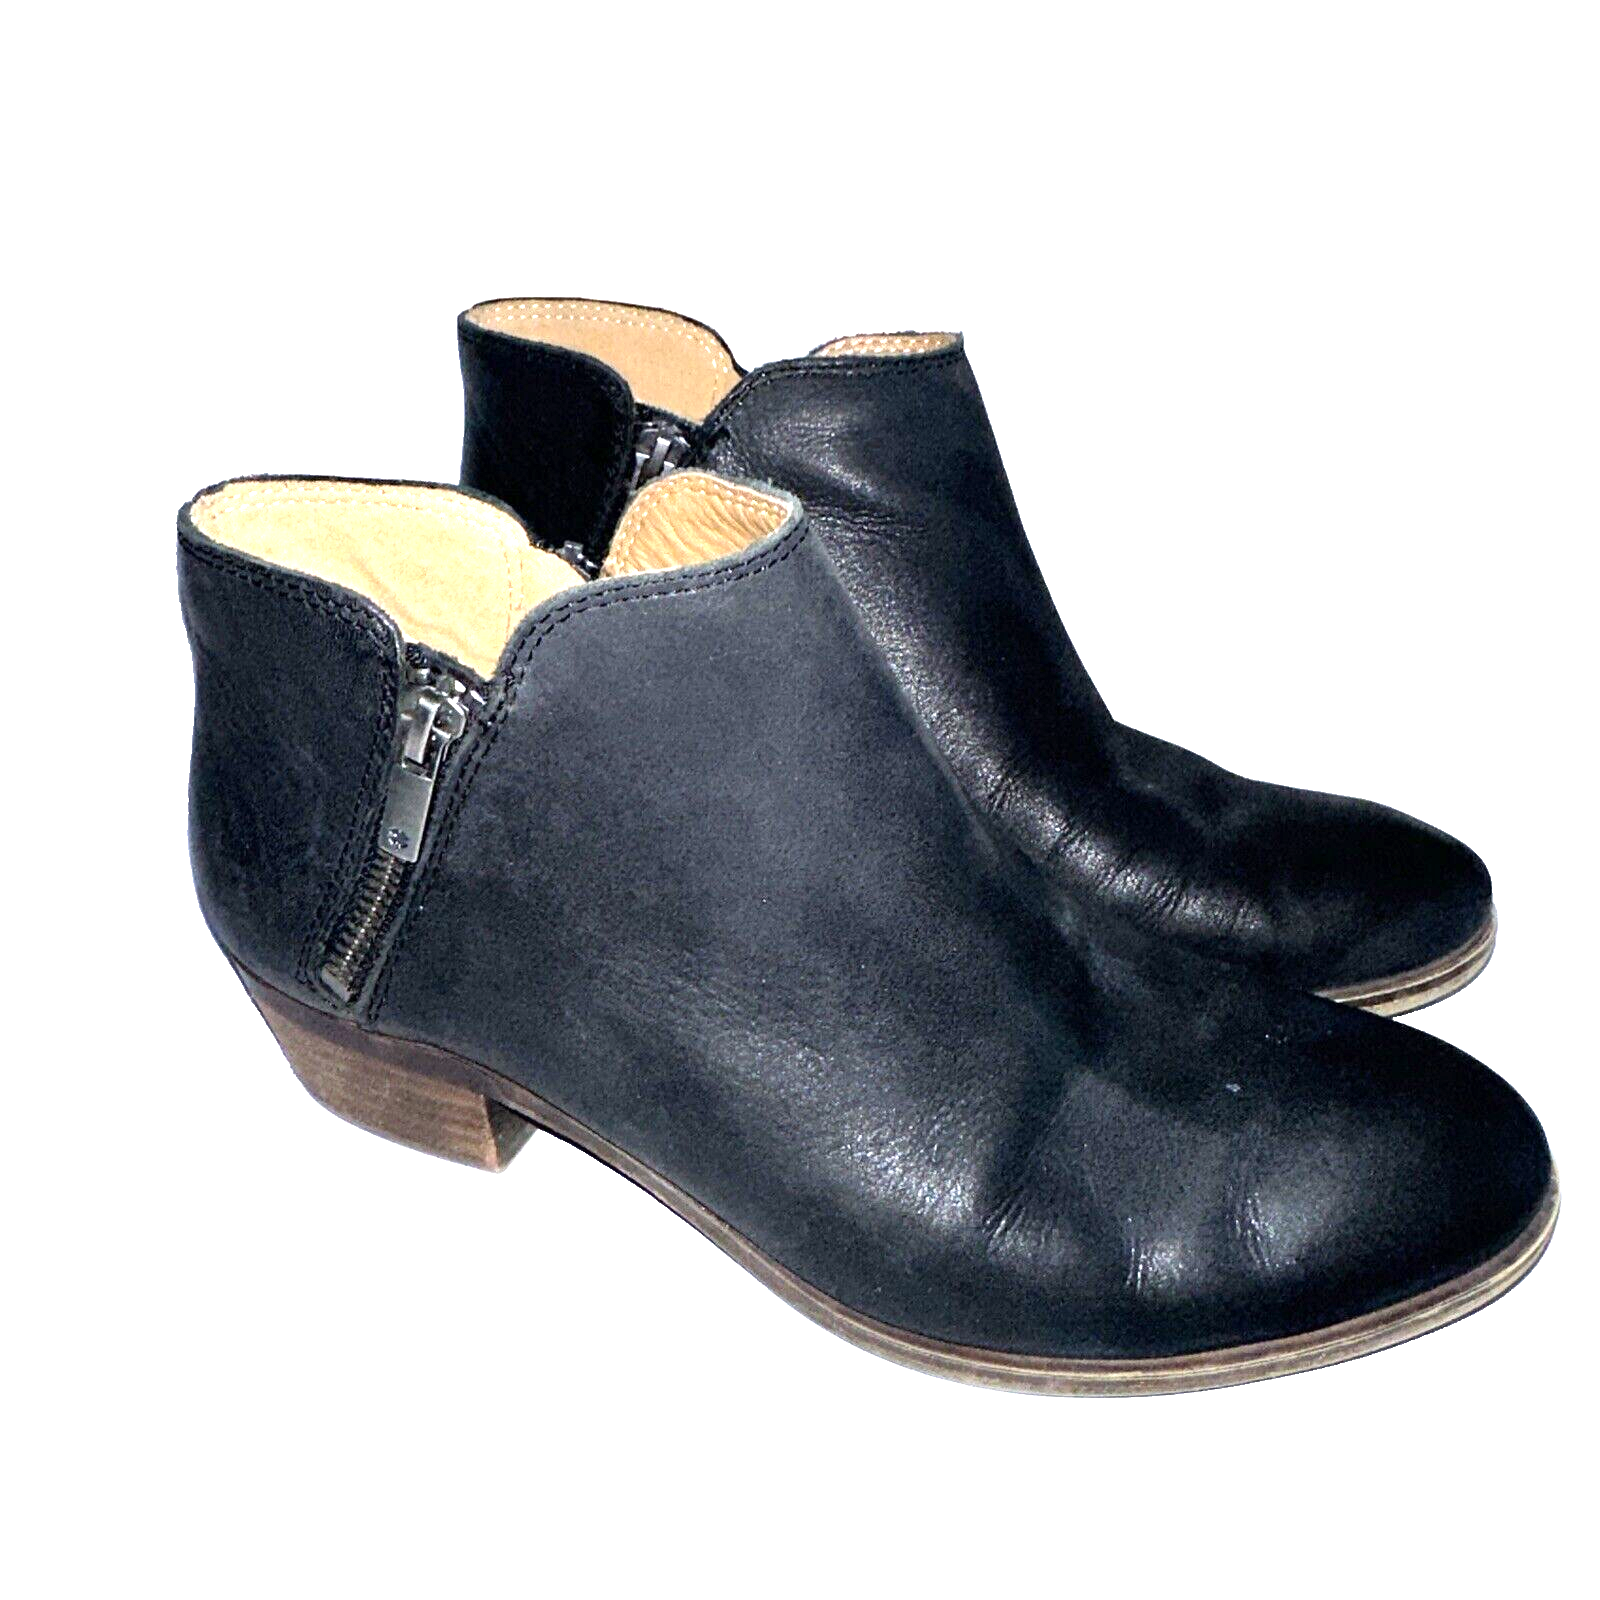 Primary image for Lucky Brand Boots Womens 7.5M Burklee Ankle Bootie Black Leather Side Zip Casual